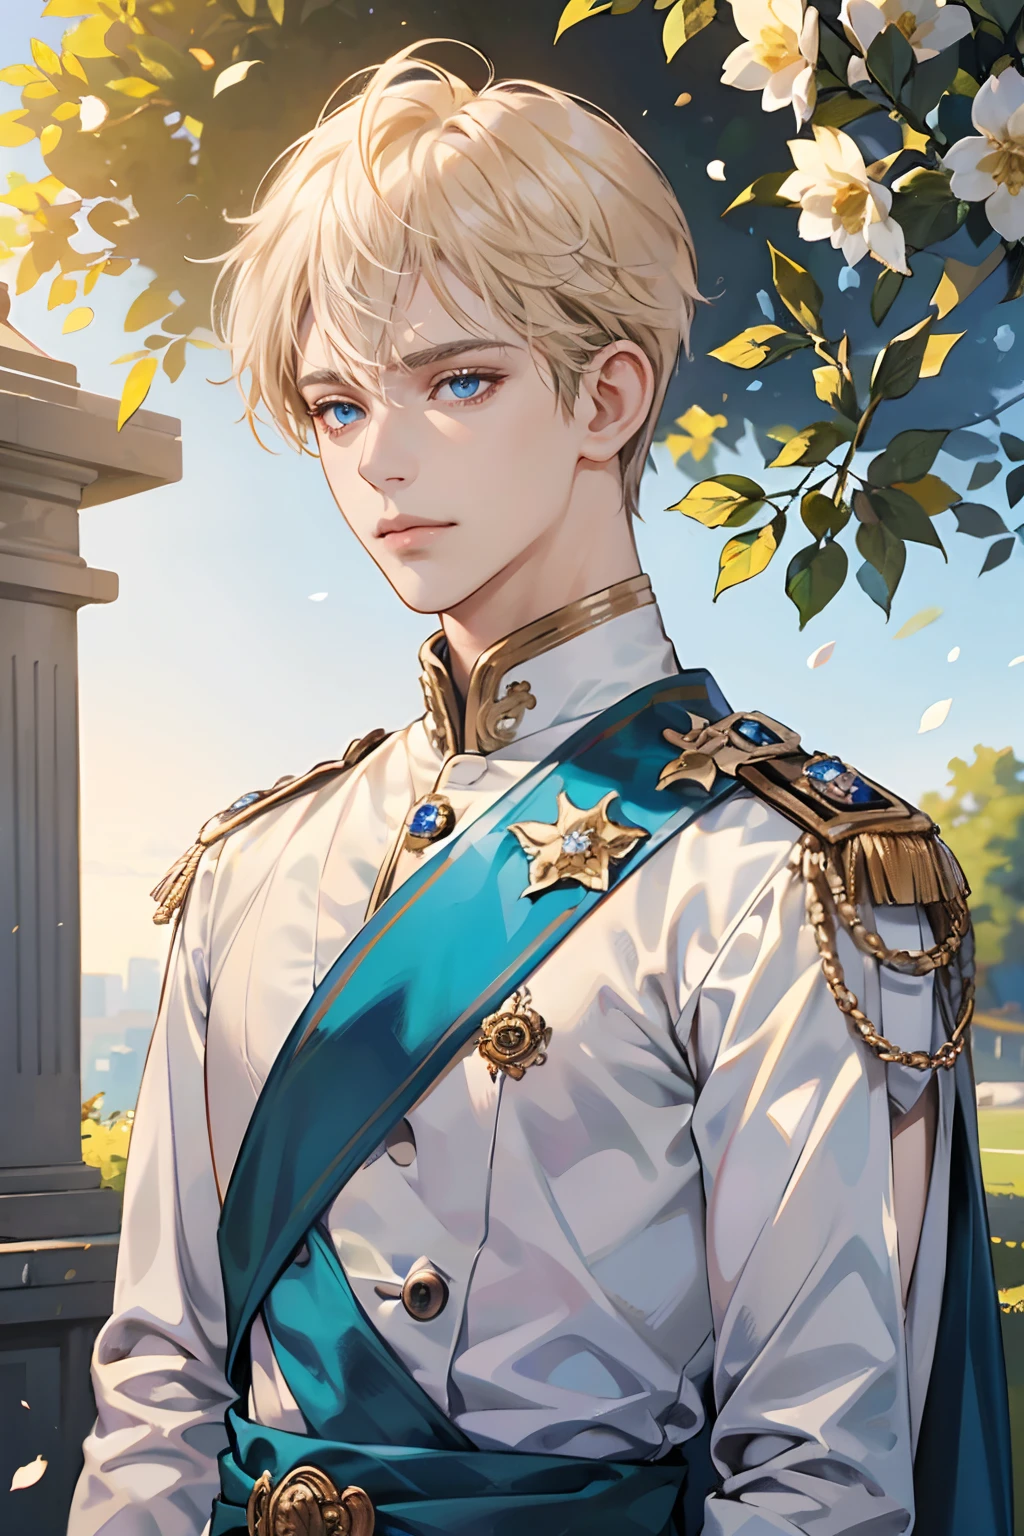 (tmasterpiece, high resolution, ultra - detailed:1.0), (1boy, adult male), Perfect male body,Eyes look at the camera, (prince:1.3), Delicate eyes and delicate face, Extremely detailed CG, Unity 8k wallpaper, Complicated details, solo person, Detailed face, (White royal costume, with short golden hair, Blue eyes, Sad expression), Outdoor, sonoko, Flowers and trees, marbled columns, color difference, Depth of field, dramatic shadow, Ray tracing, Best quality, Portrait